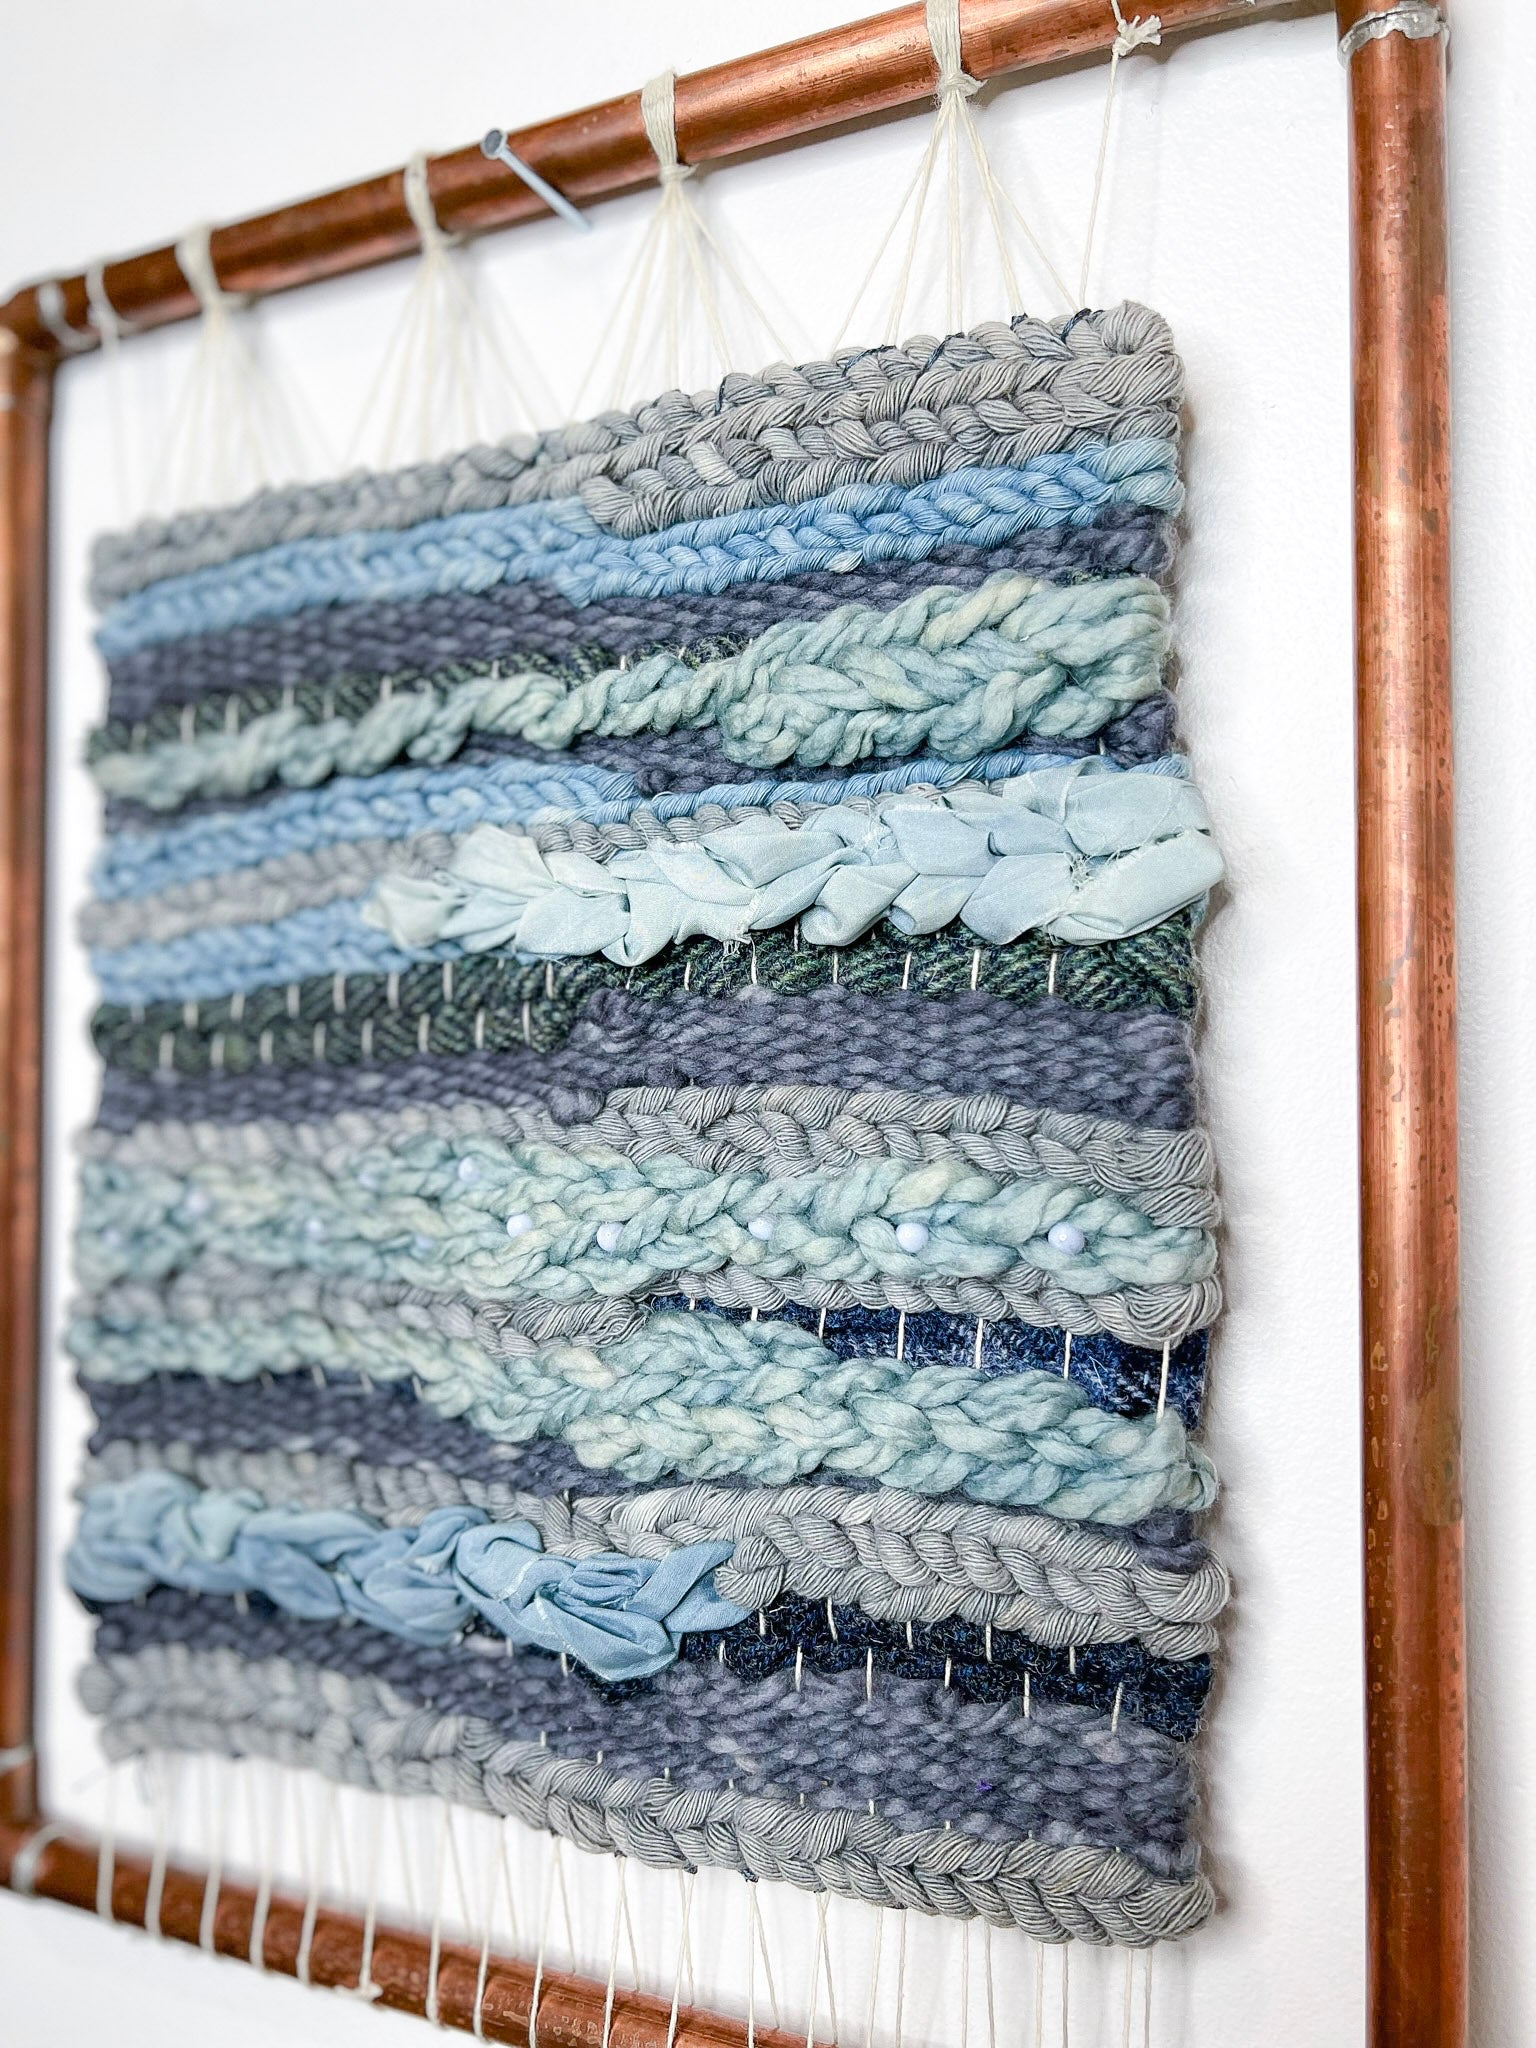 Naturally Dyed Woven Wall Hanging 'Calm' with Harris Tweed and Blue Lace Agate